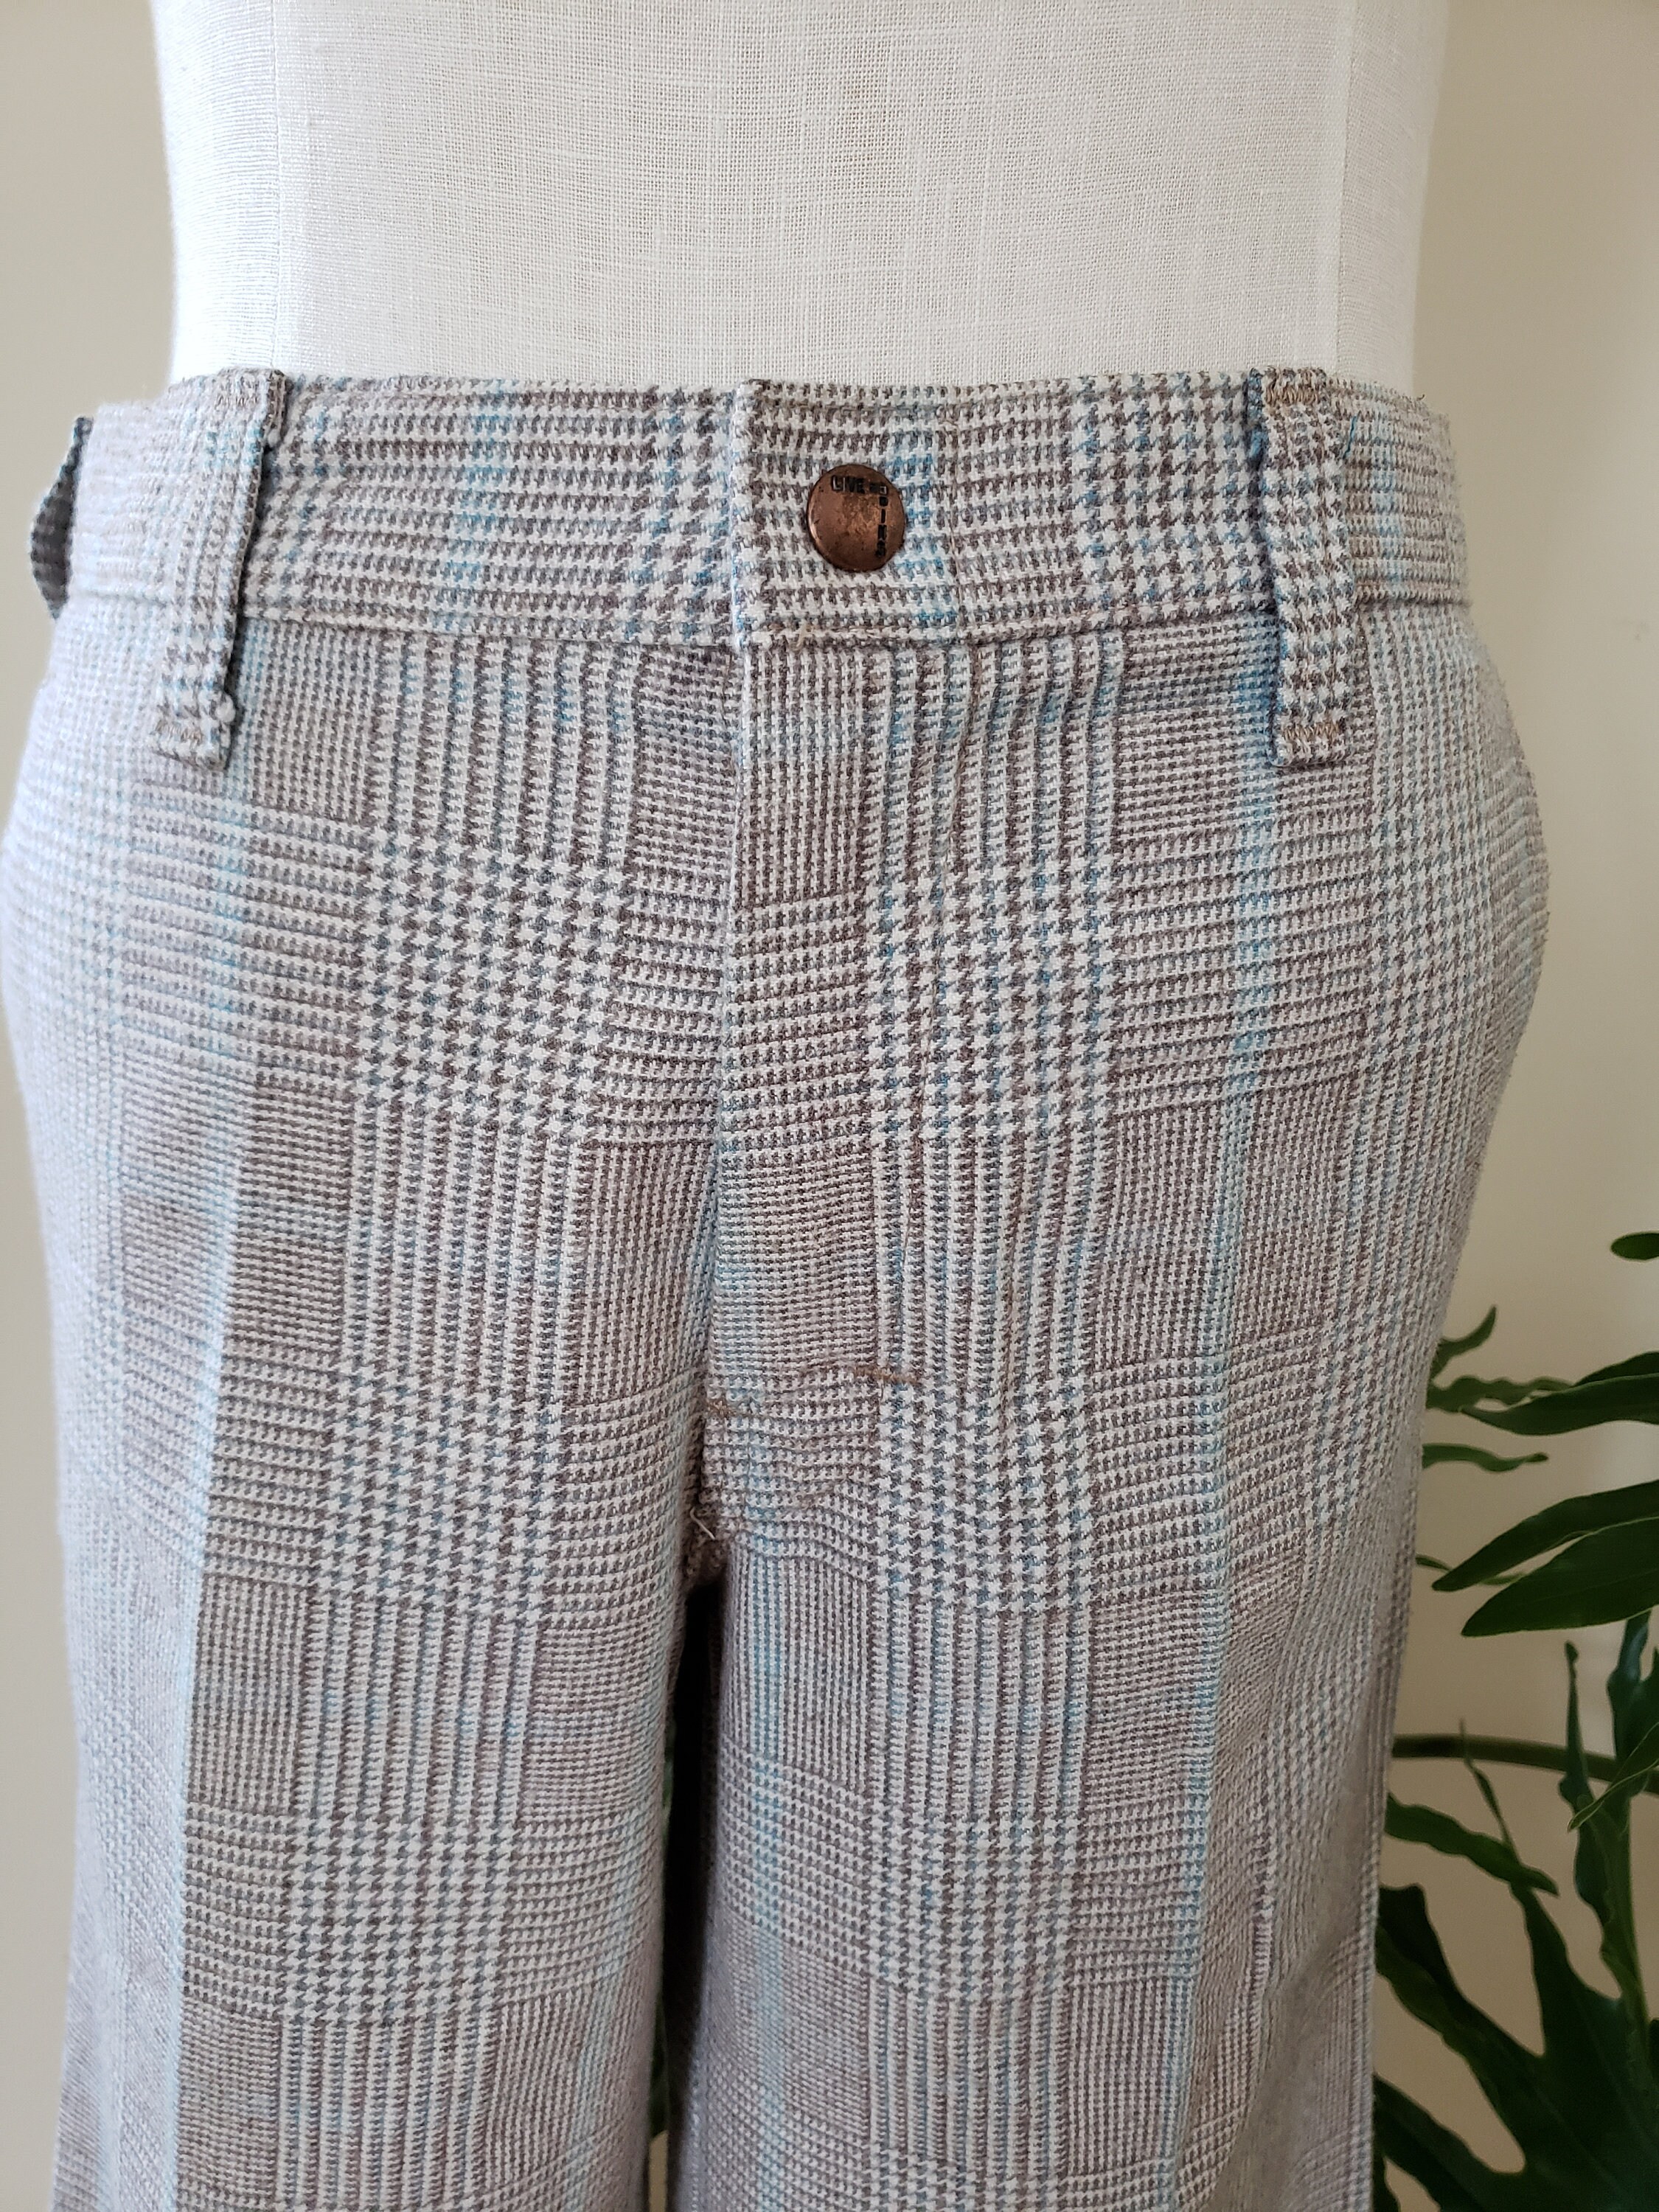 1970s blue grey and white houndstooth live-in highwaisted | Etsy